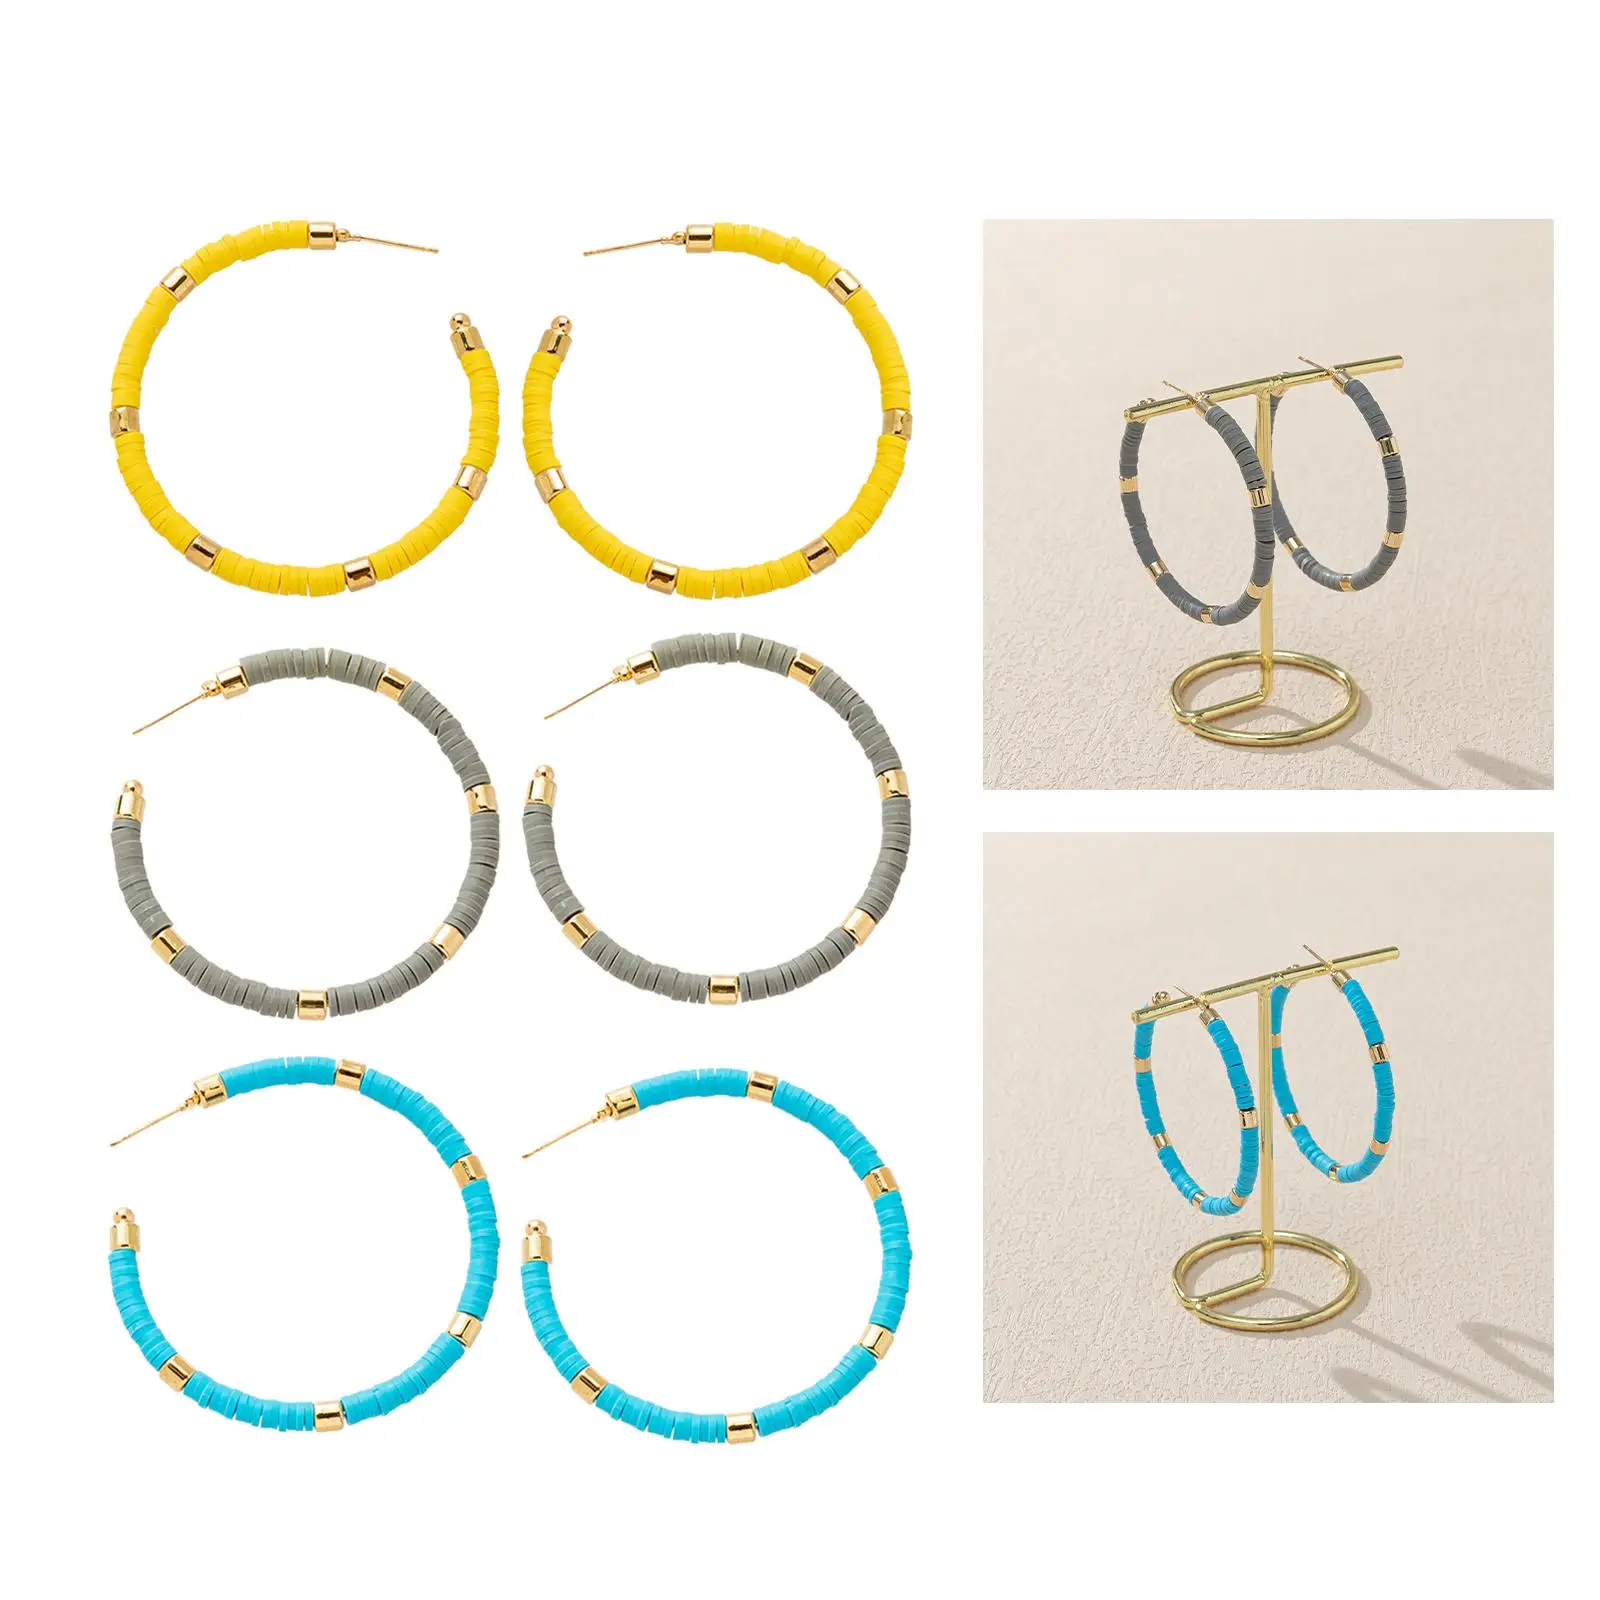 C Shaped Hoop Earrings Boho Trendy Soft Pottery Circle Lightweight Gift Statement Round Large Open Jewelry for Girls Women Teens